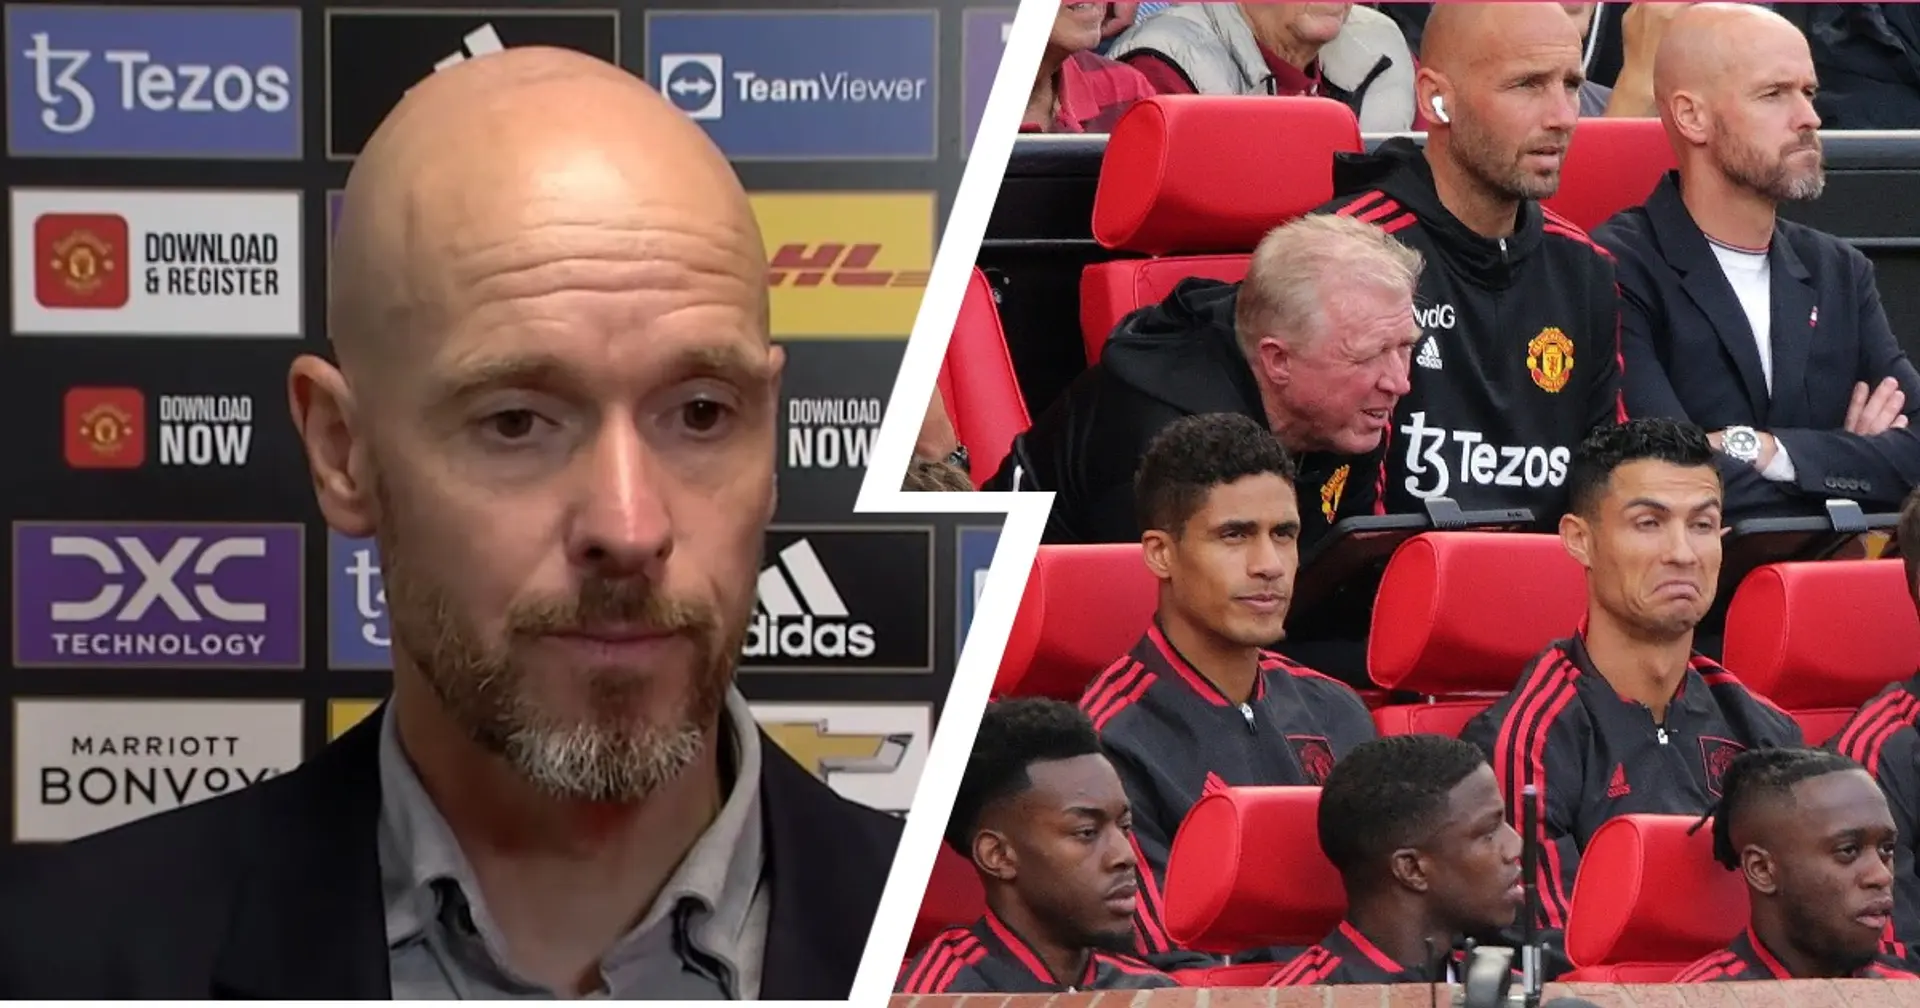 Benched against City, yet to make debut: Man United star backs 'good coach' Ten Hag